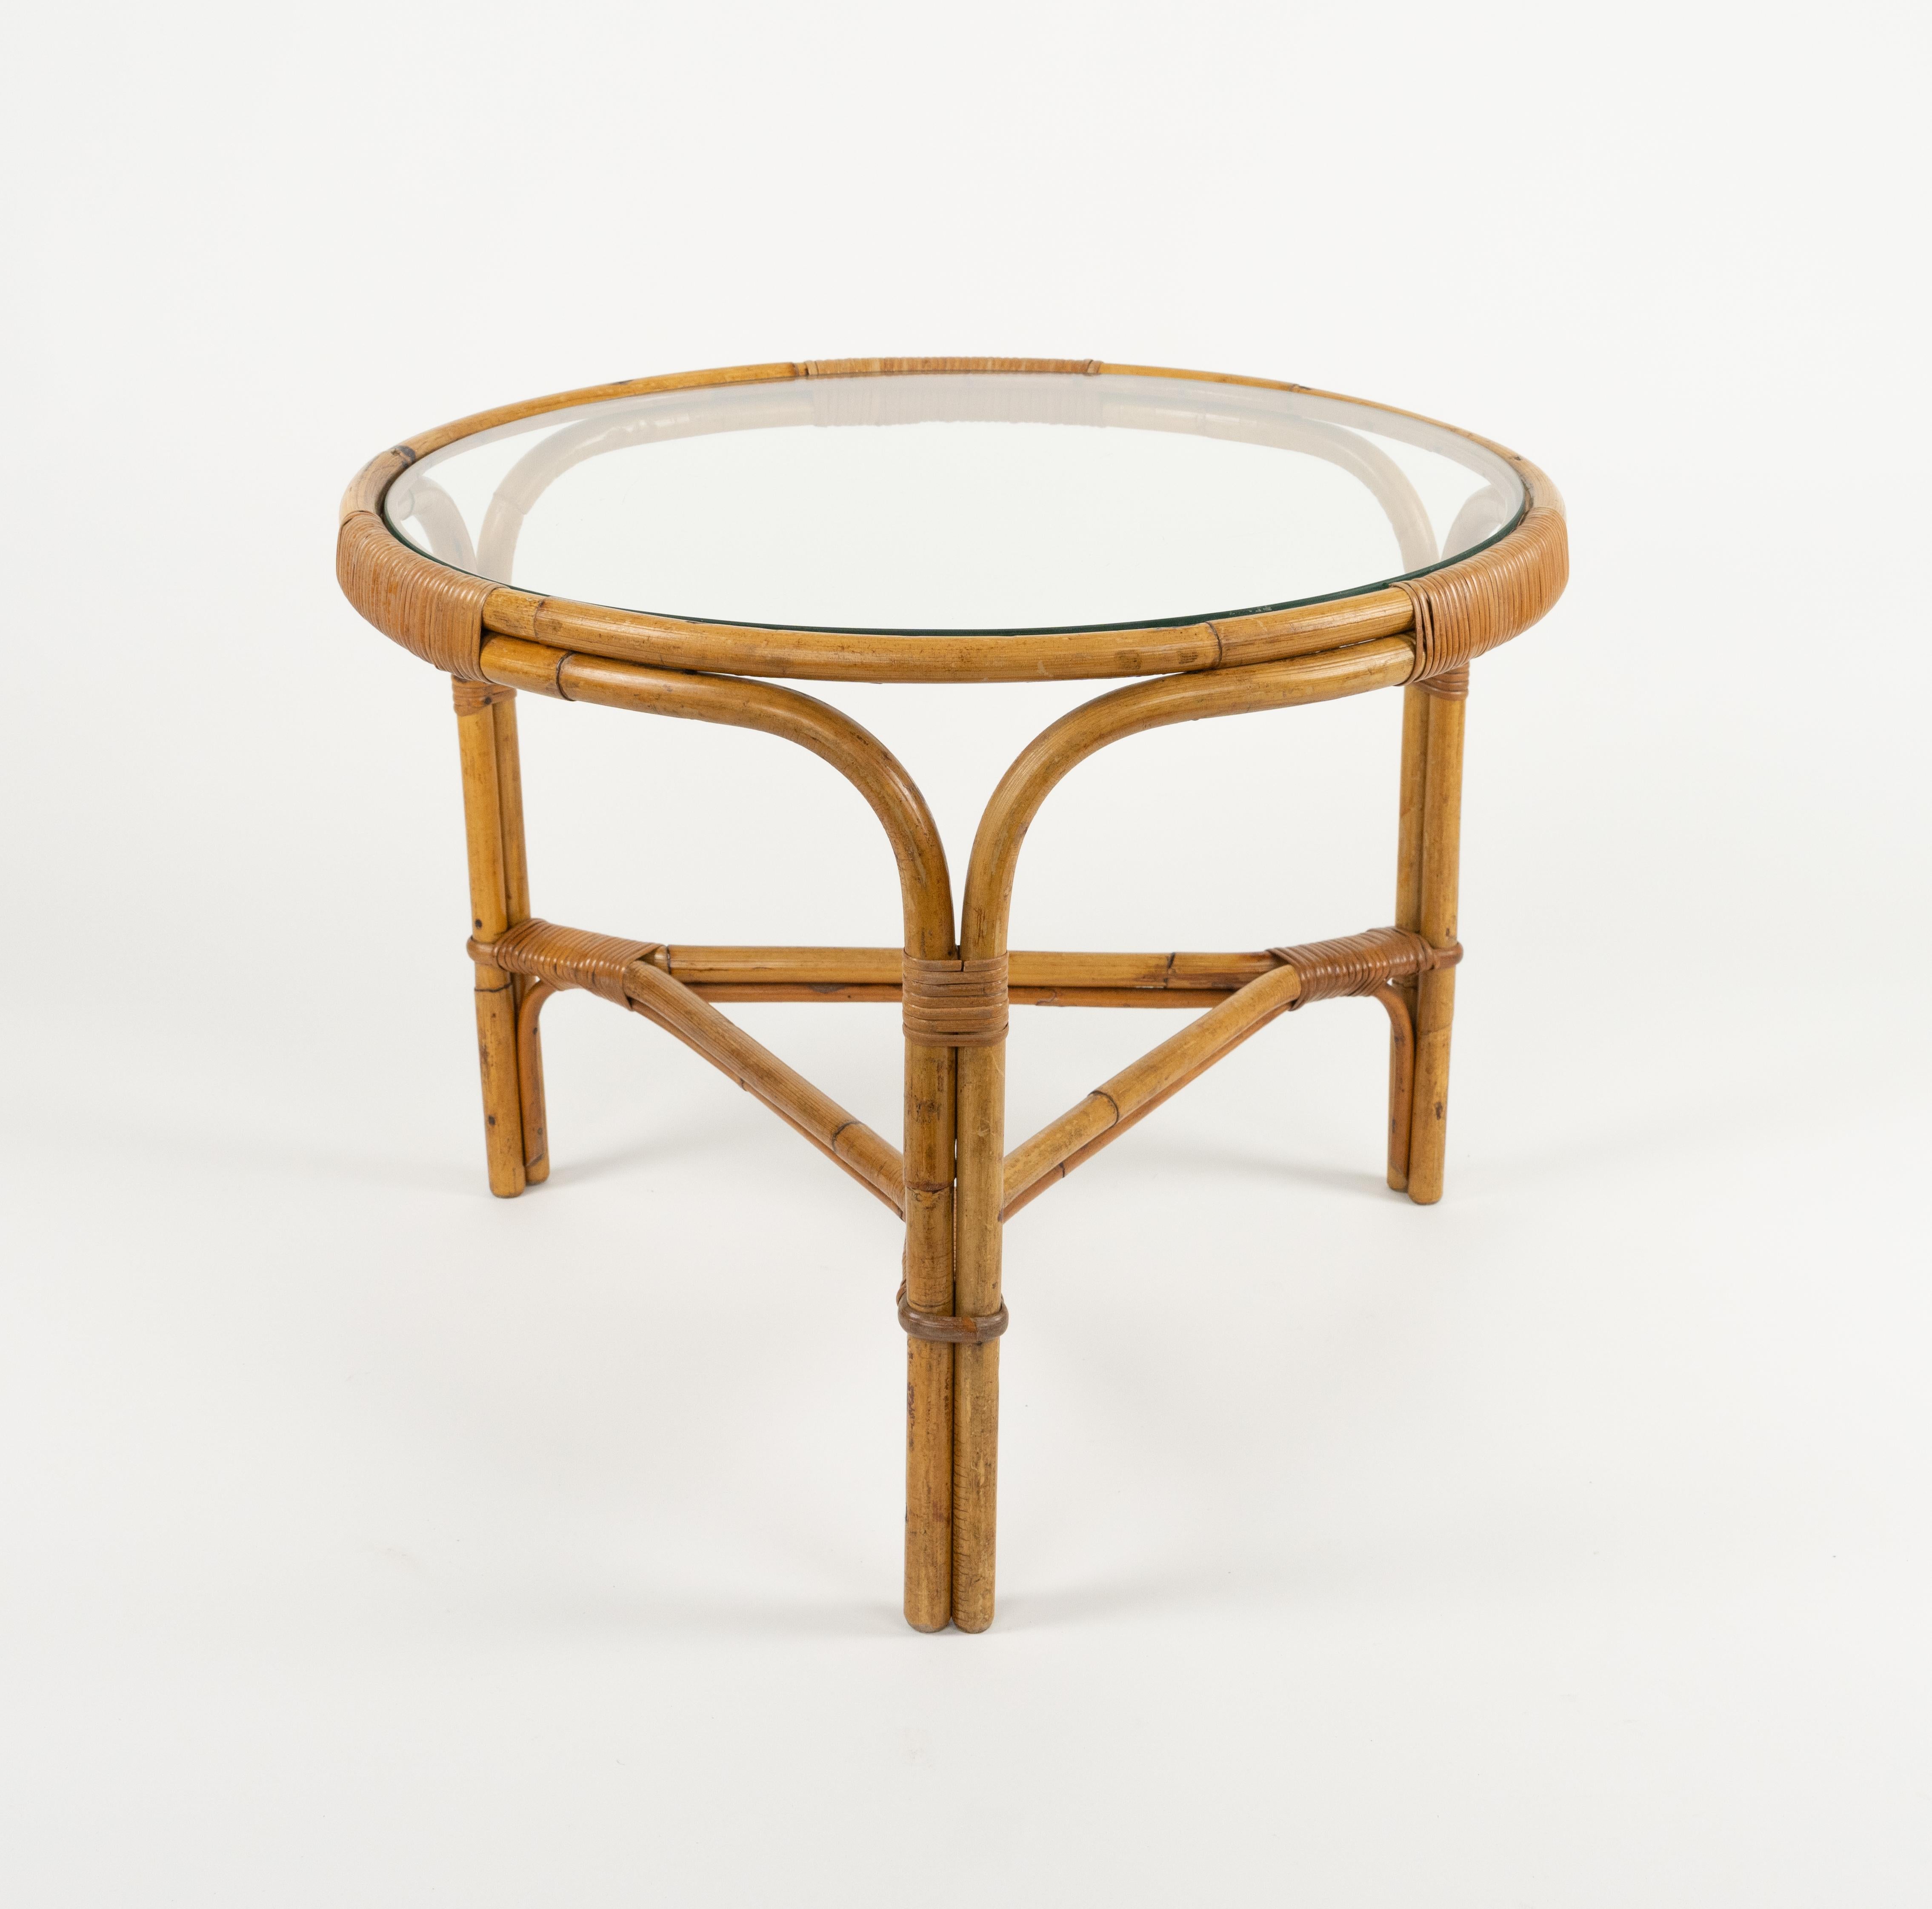 Midcentury amazing round coffee table in bamboo, rattan and top glass.

Made in Italy in the 1960s.